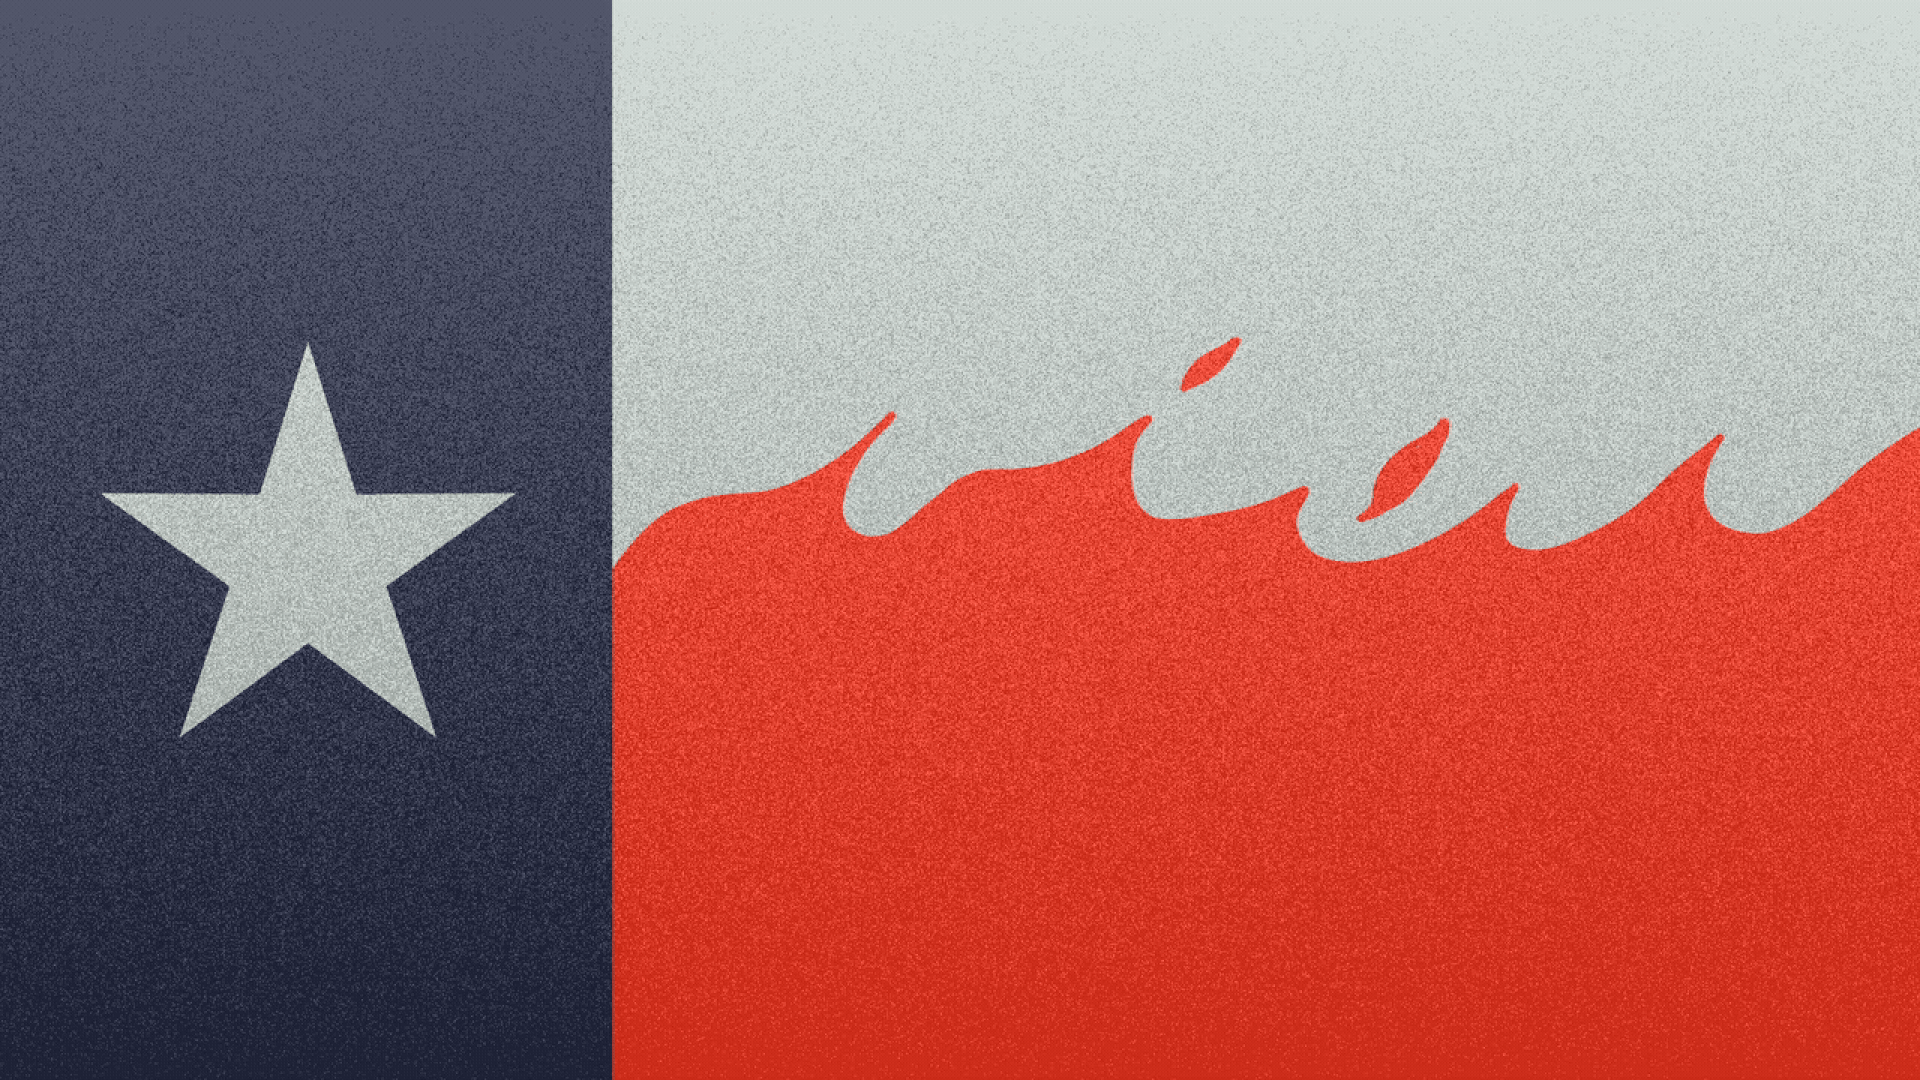 Illustration of the Texas flag, with fire replacing the bottom red stripe.